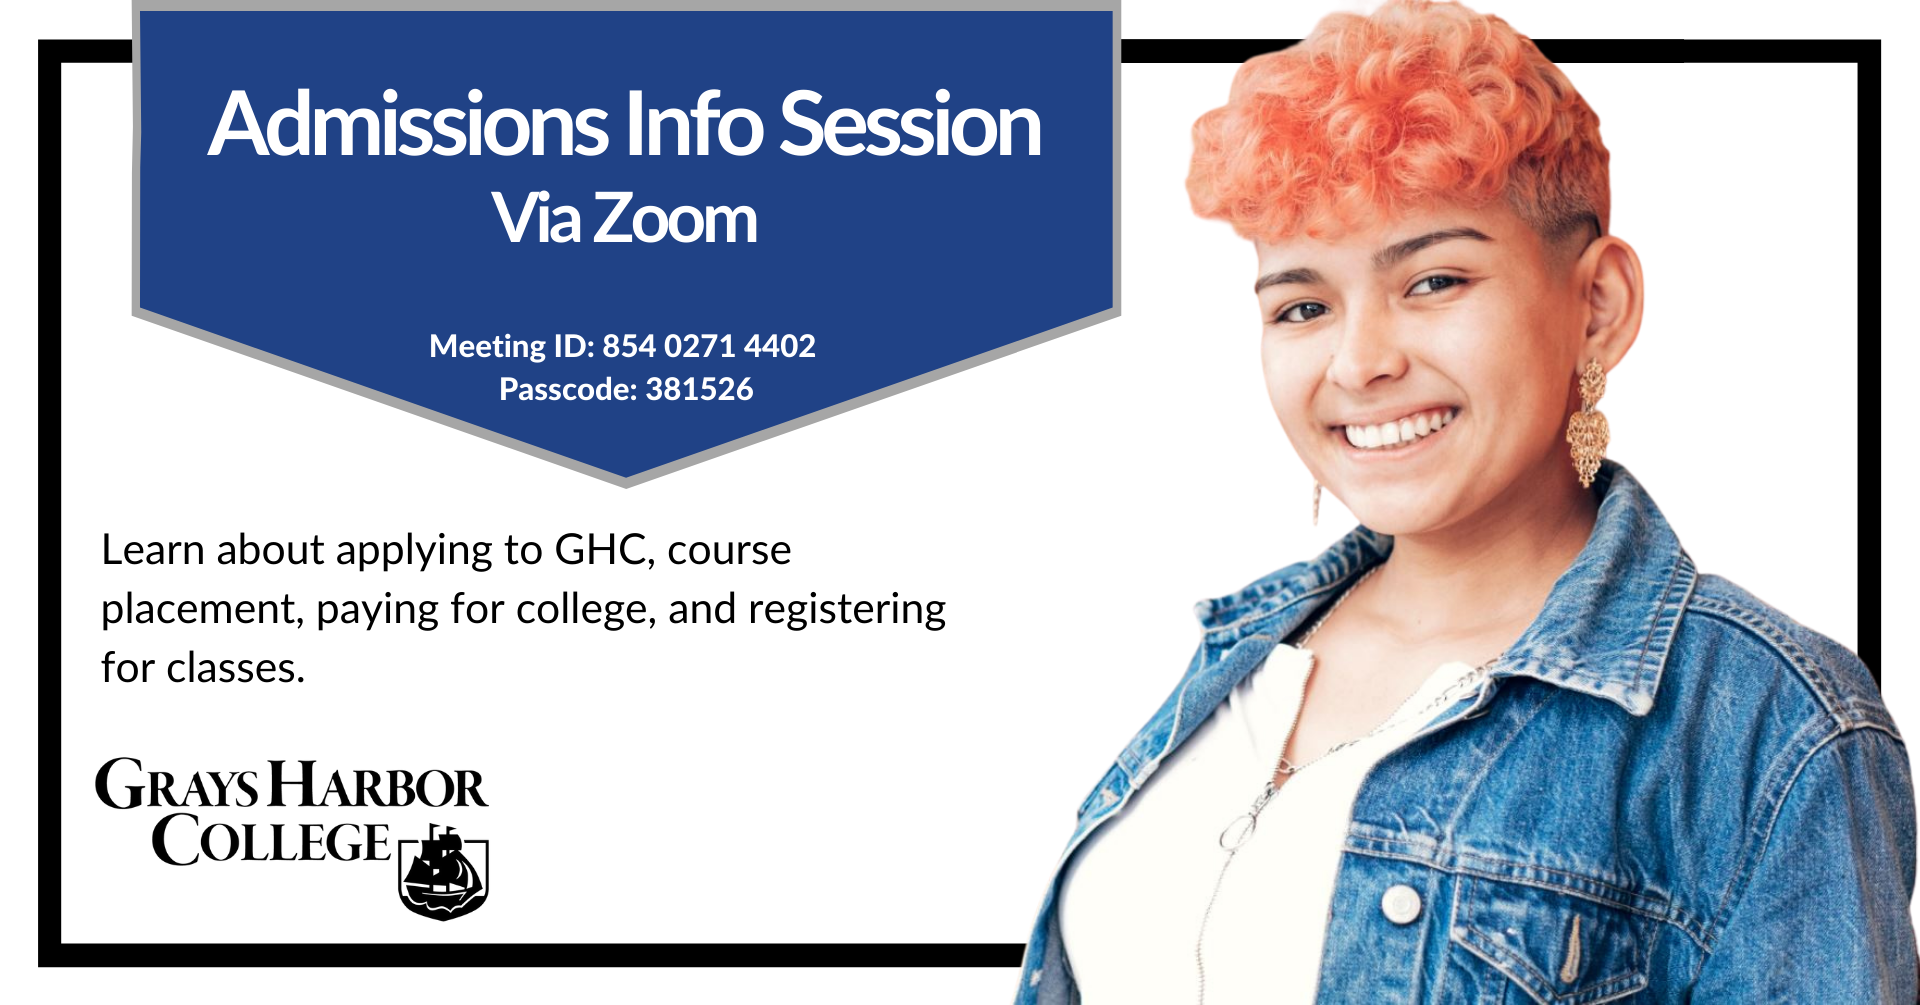 Learn about applying to GHC, course placement, paying for college, and registering for classes.